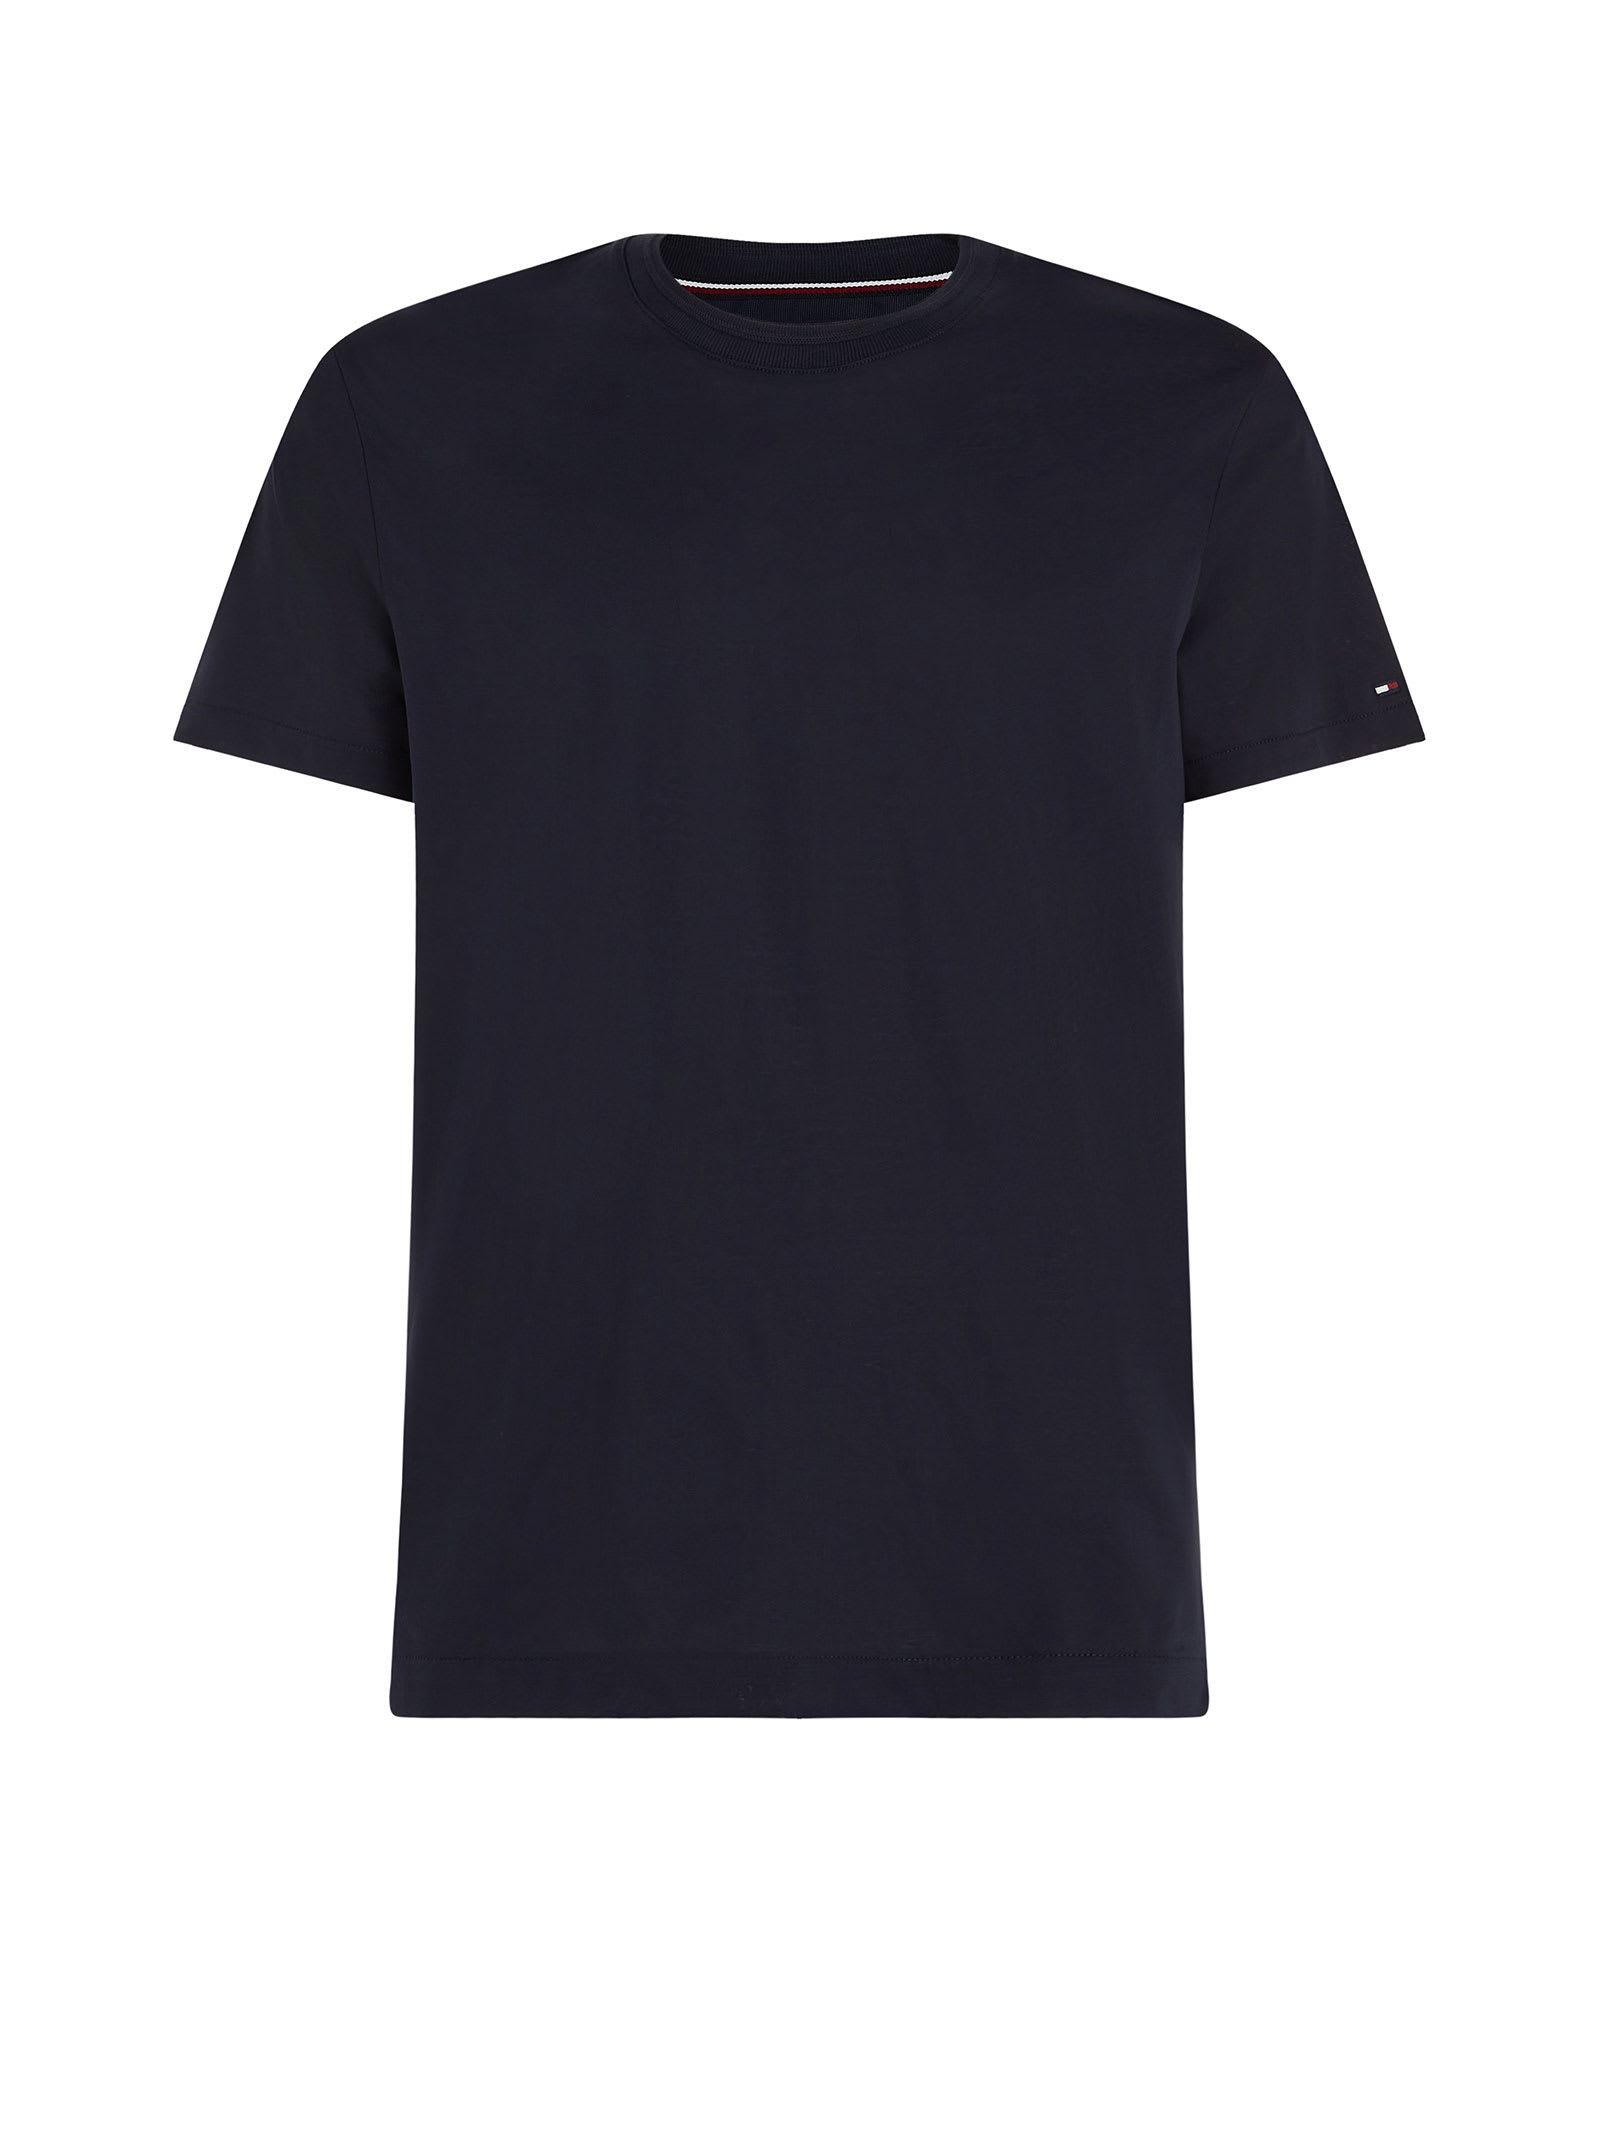 TOMMY HILFIGER ESSENTIAL T-SHIRT IN JERSEY